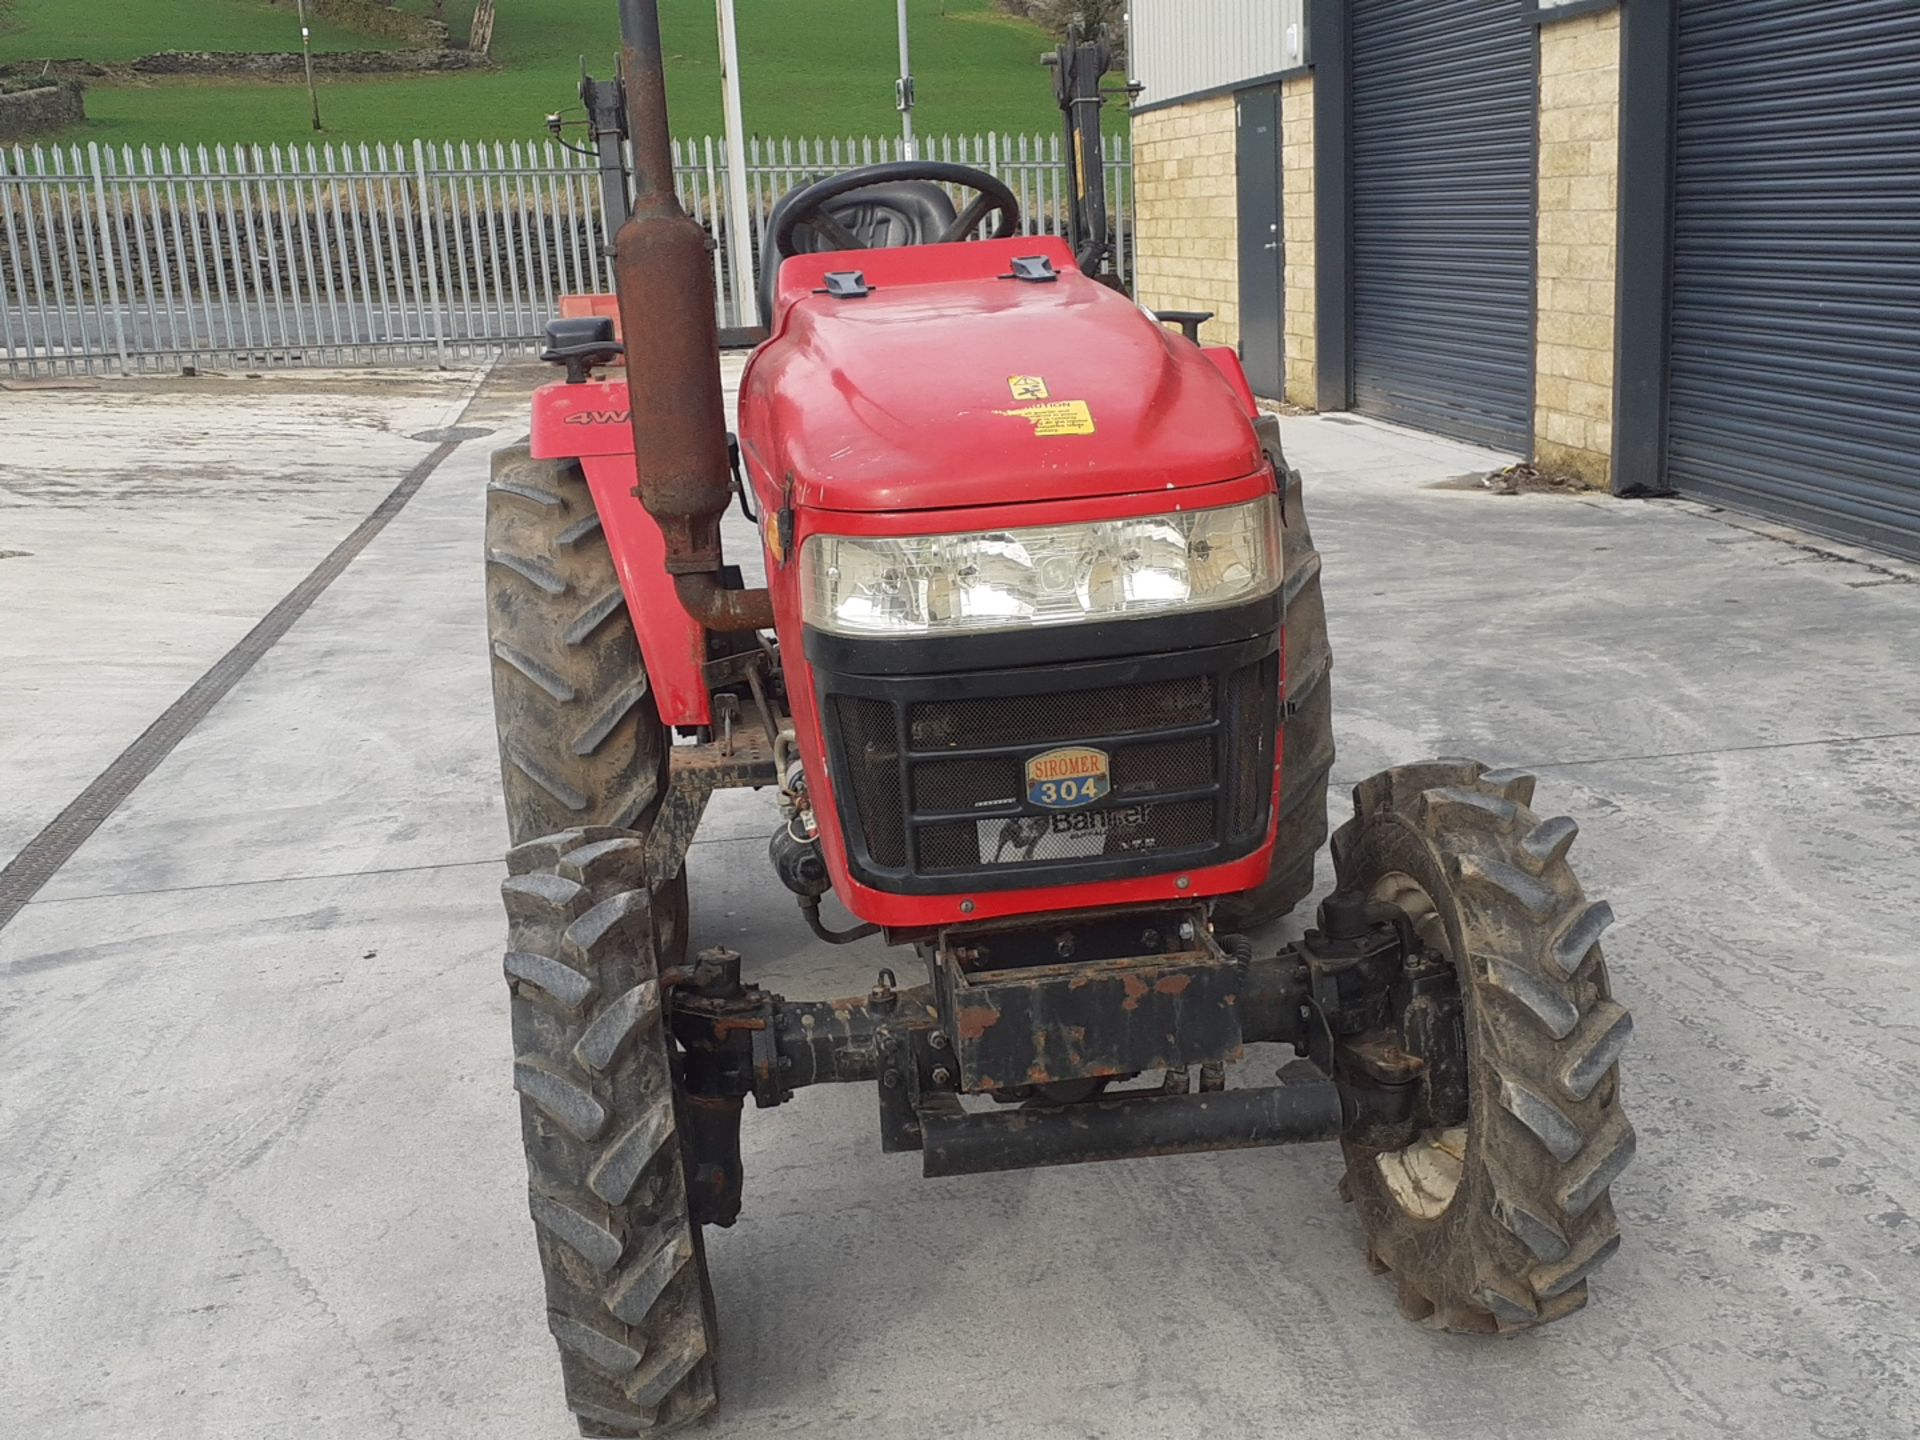 SIROMER 304 4WD TRACTOR 30HP MANUAL GEARBOX *PLUS VAT* - Image 5 of 6